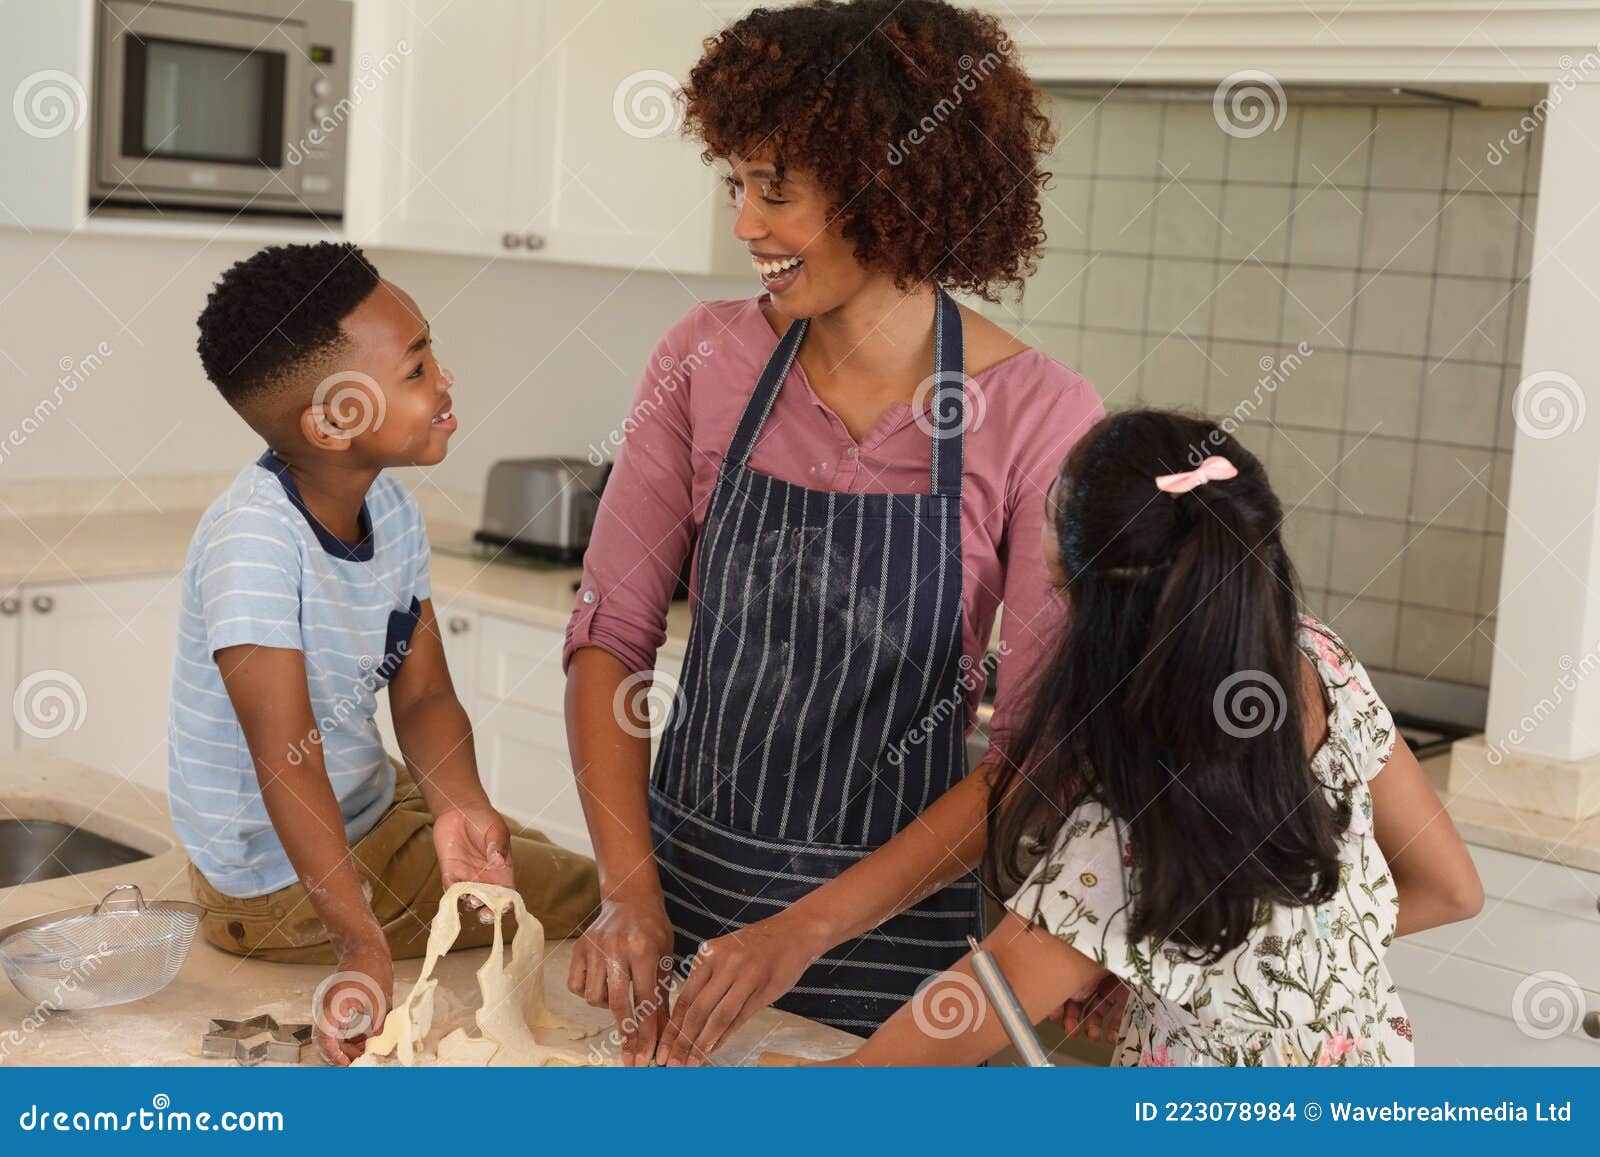 https://thumbs.dreamstime.com/z/happy-african-american-mother-son-daughter-baking-kitchen-cutting-cookies-family-enjoying-quality-free-time-together-223078984.jpg